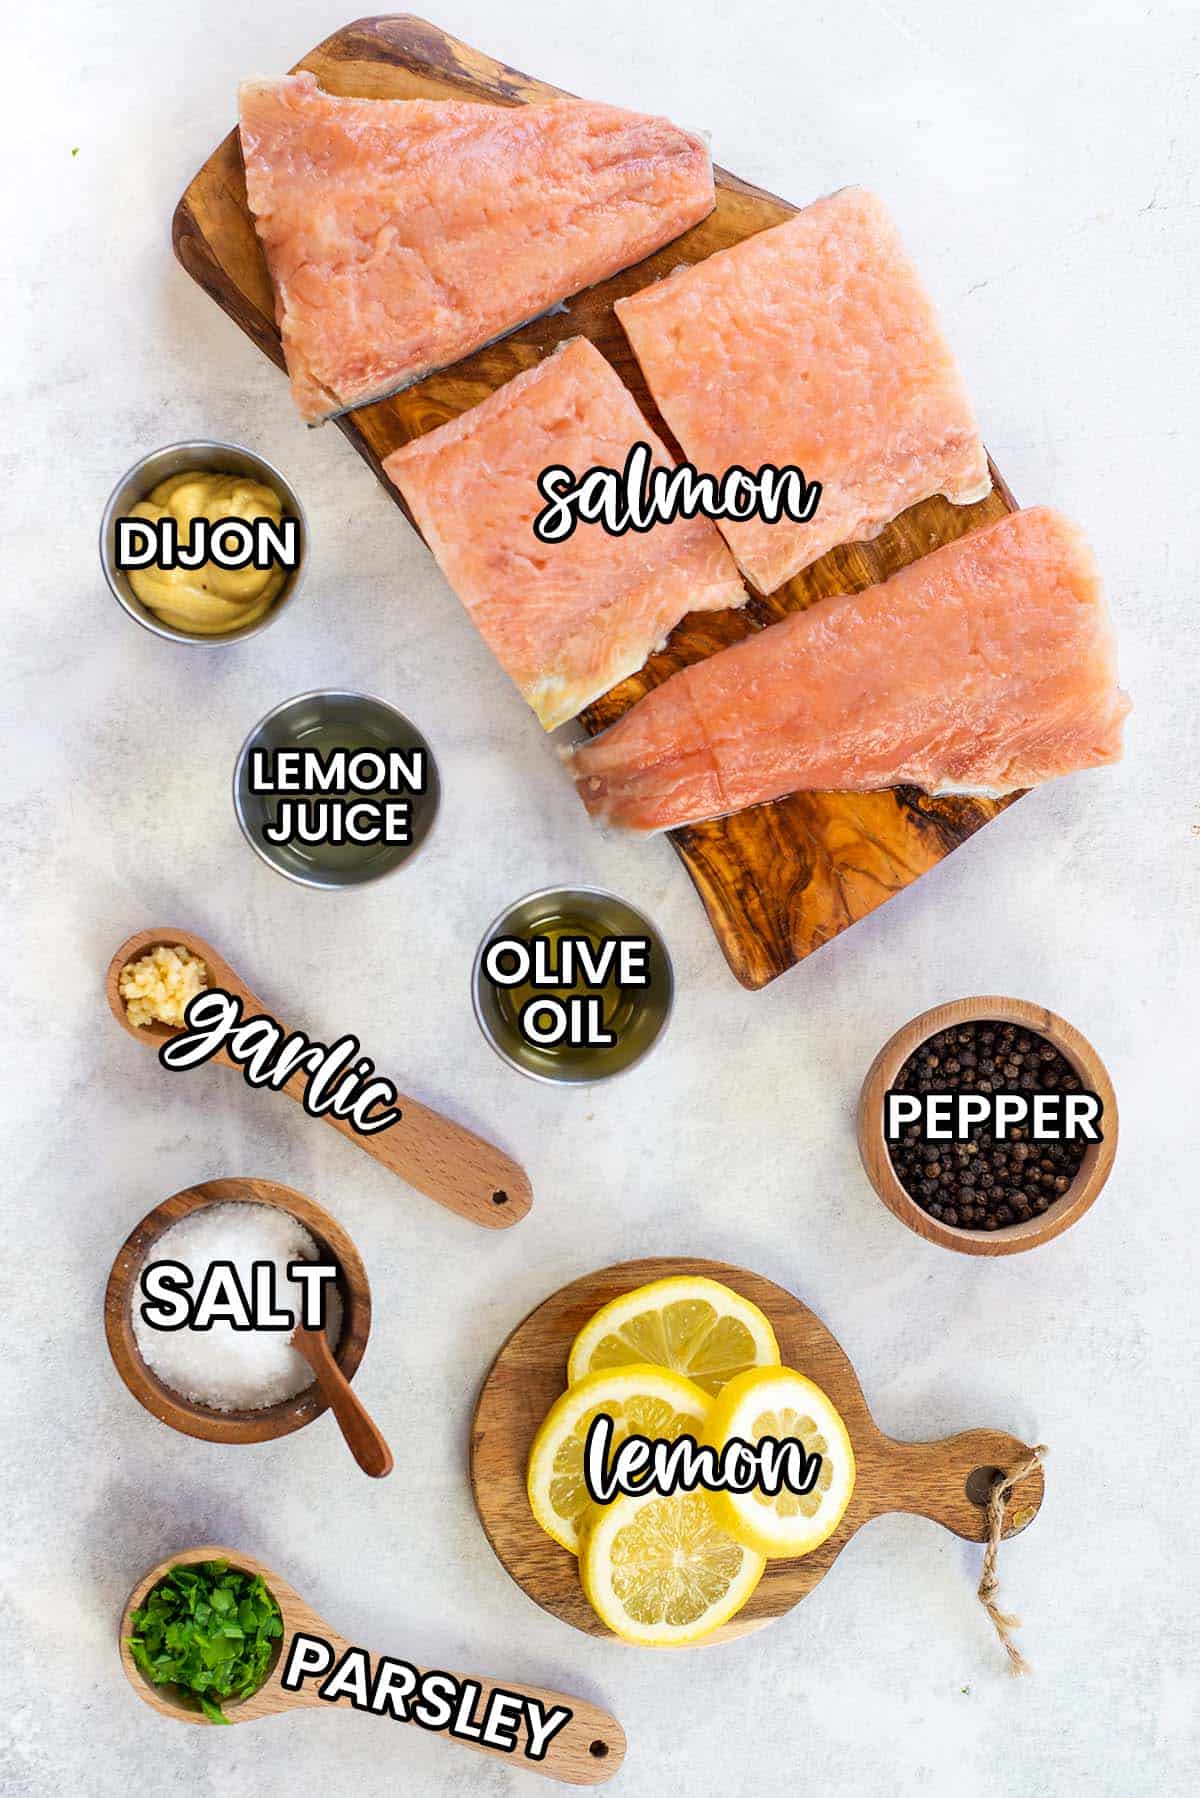 ingredients for baked salmon with dijon.